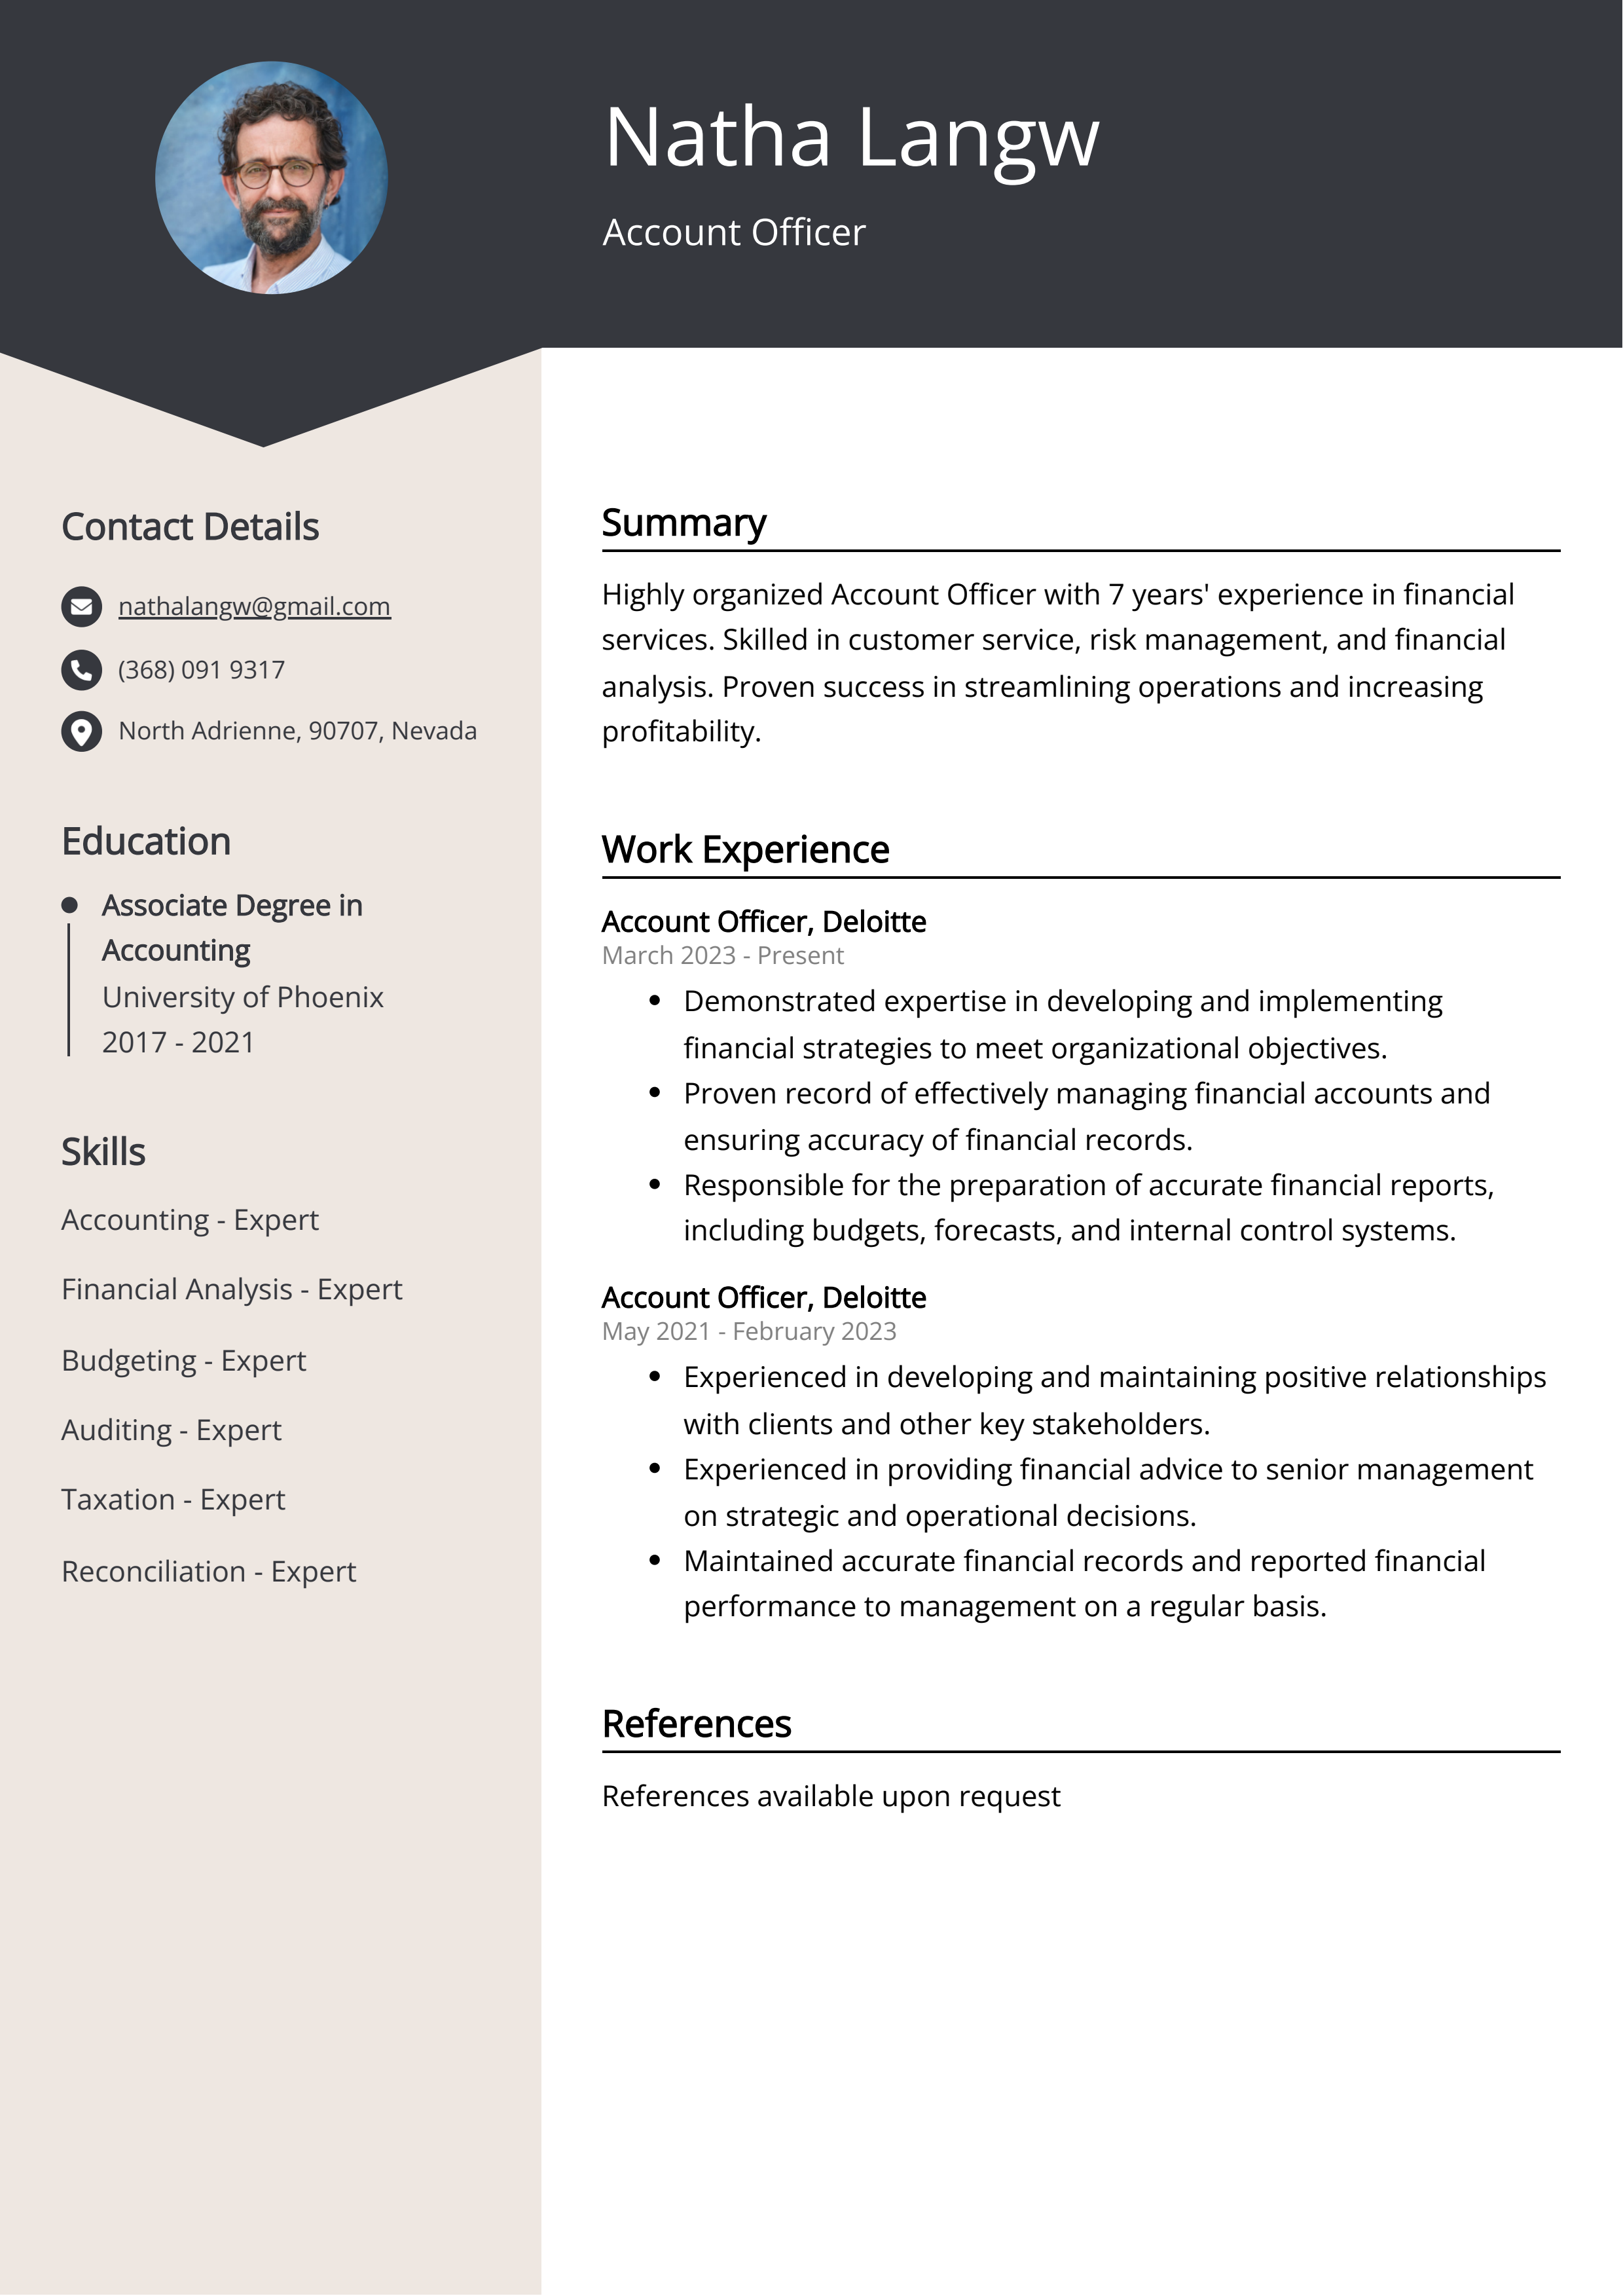 Account Officer CV Example